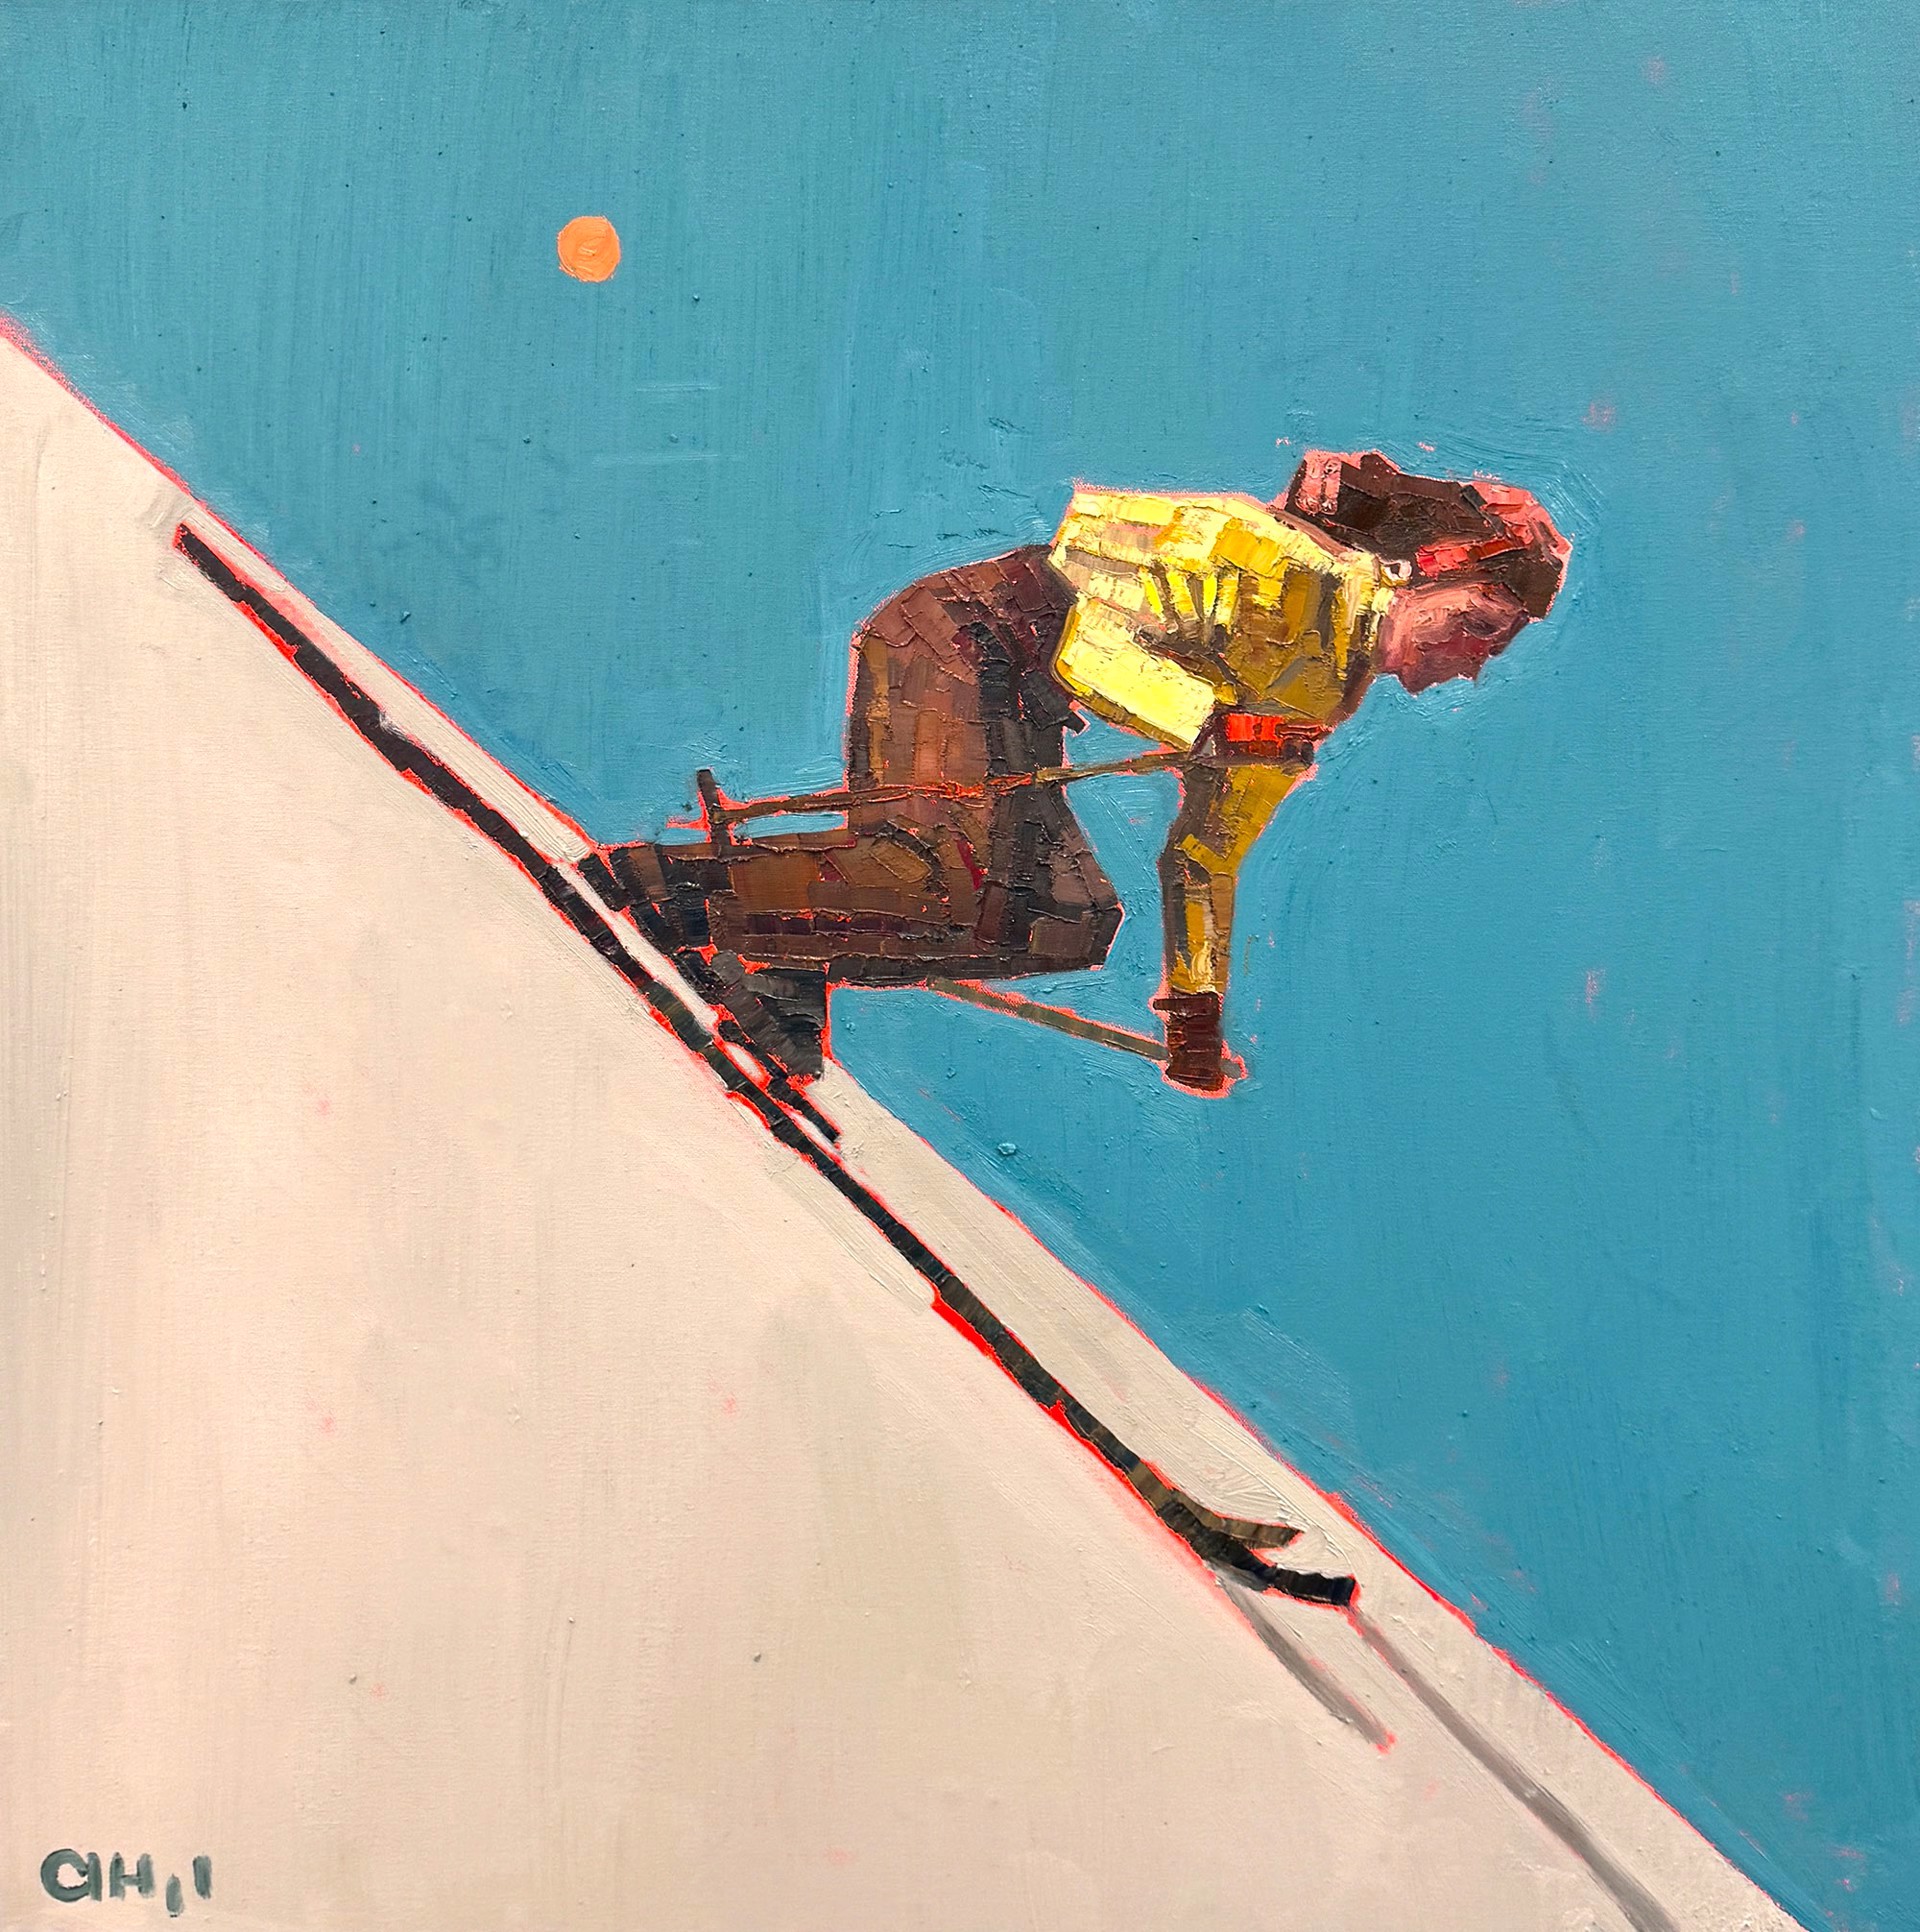 Original Oil Painting By Aaron Hazel Featuring A Vintage Woman Skier 